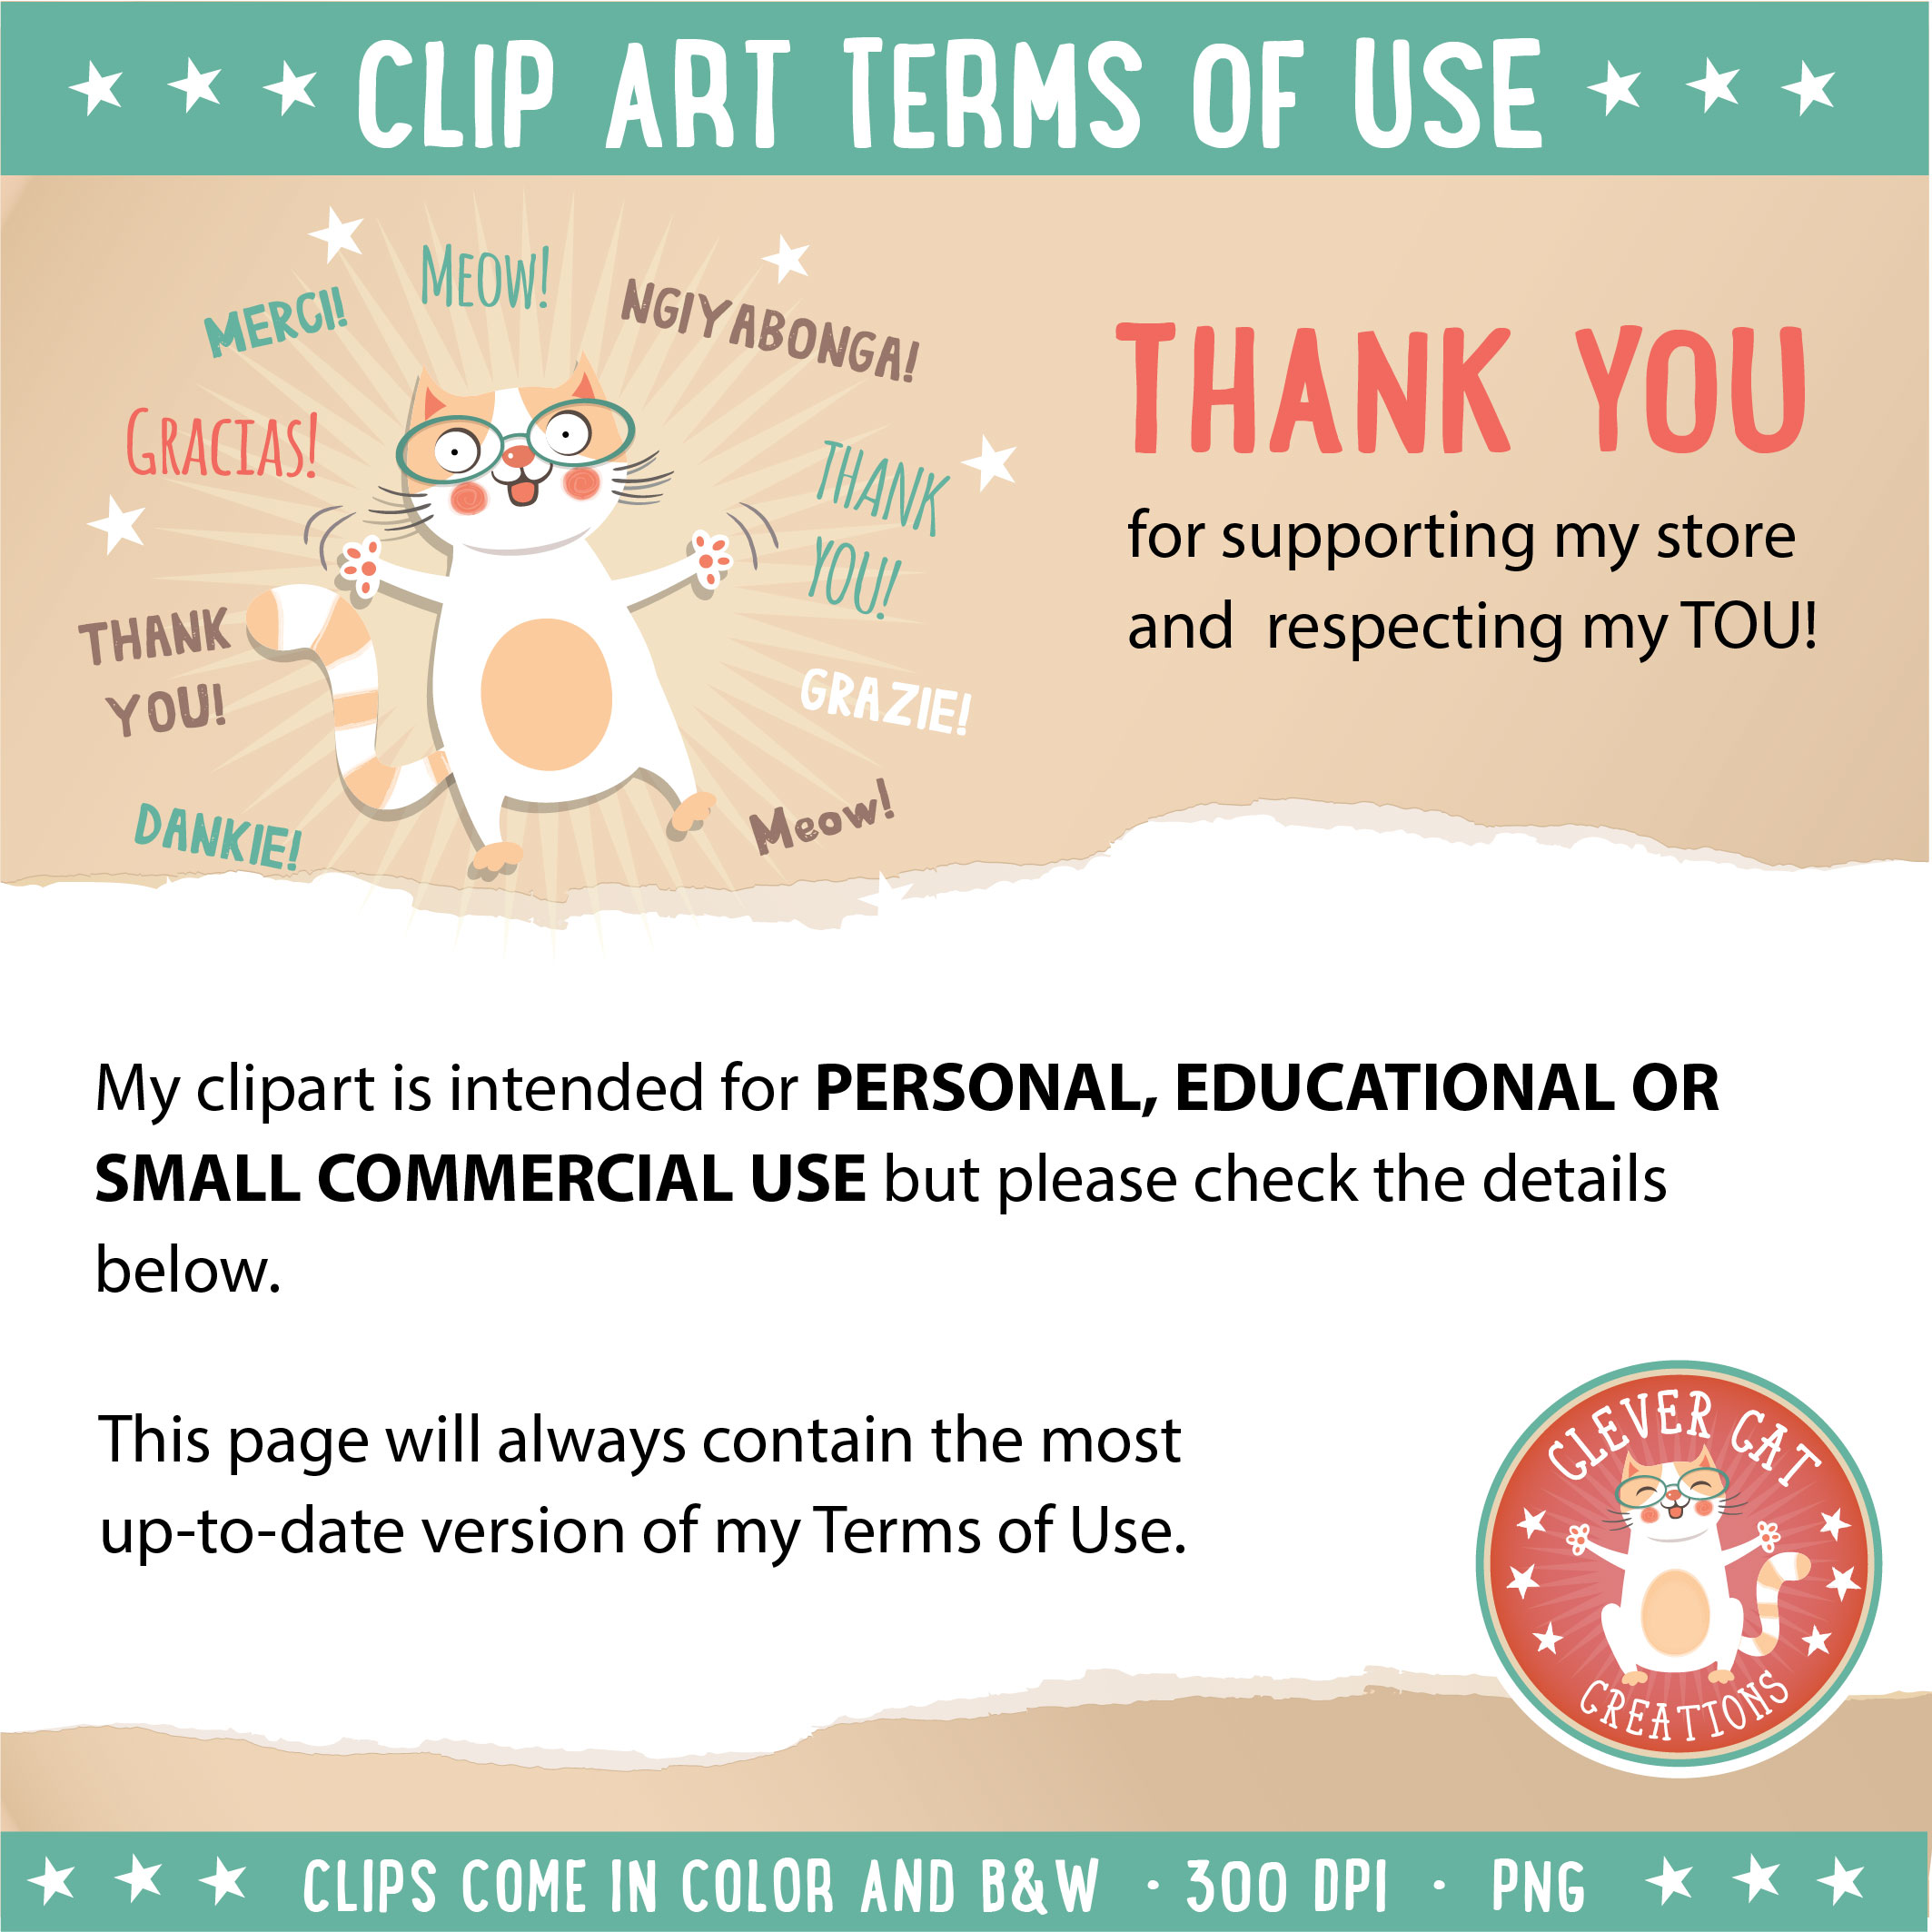 terms to know clip art